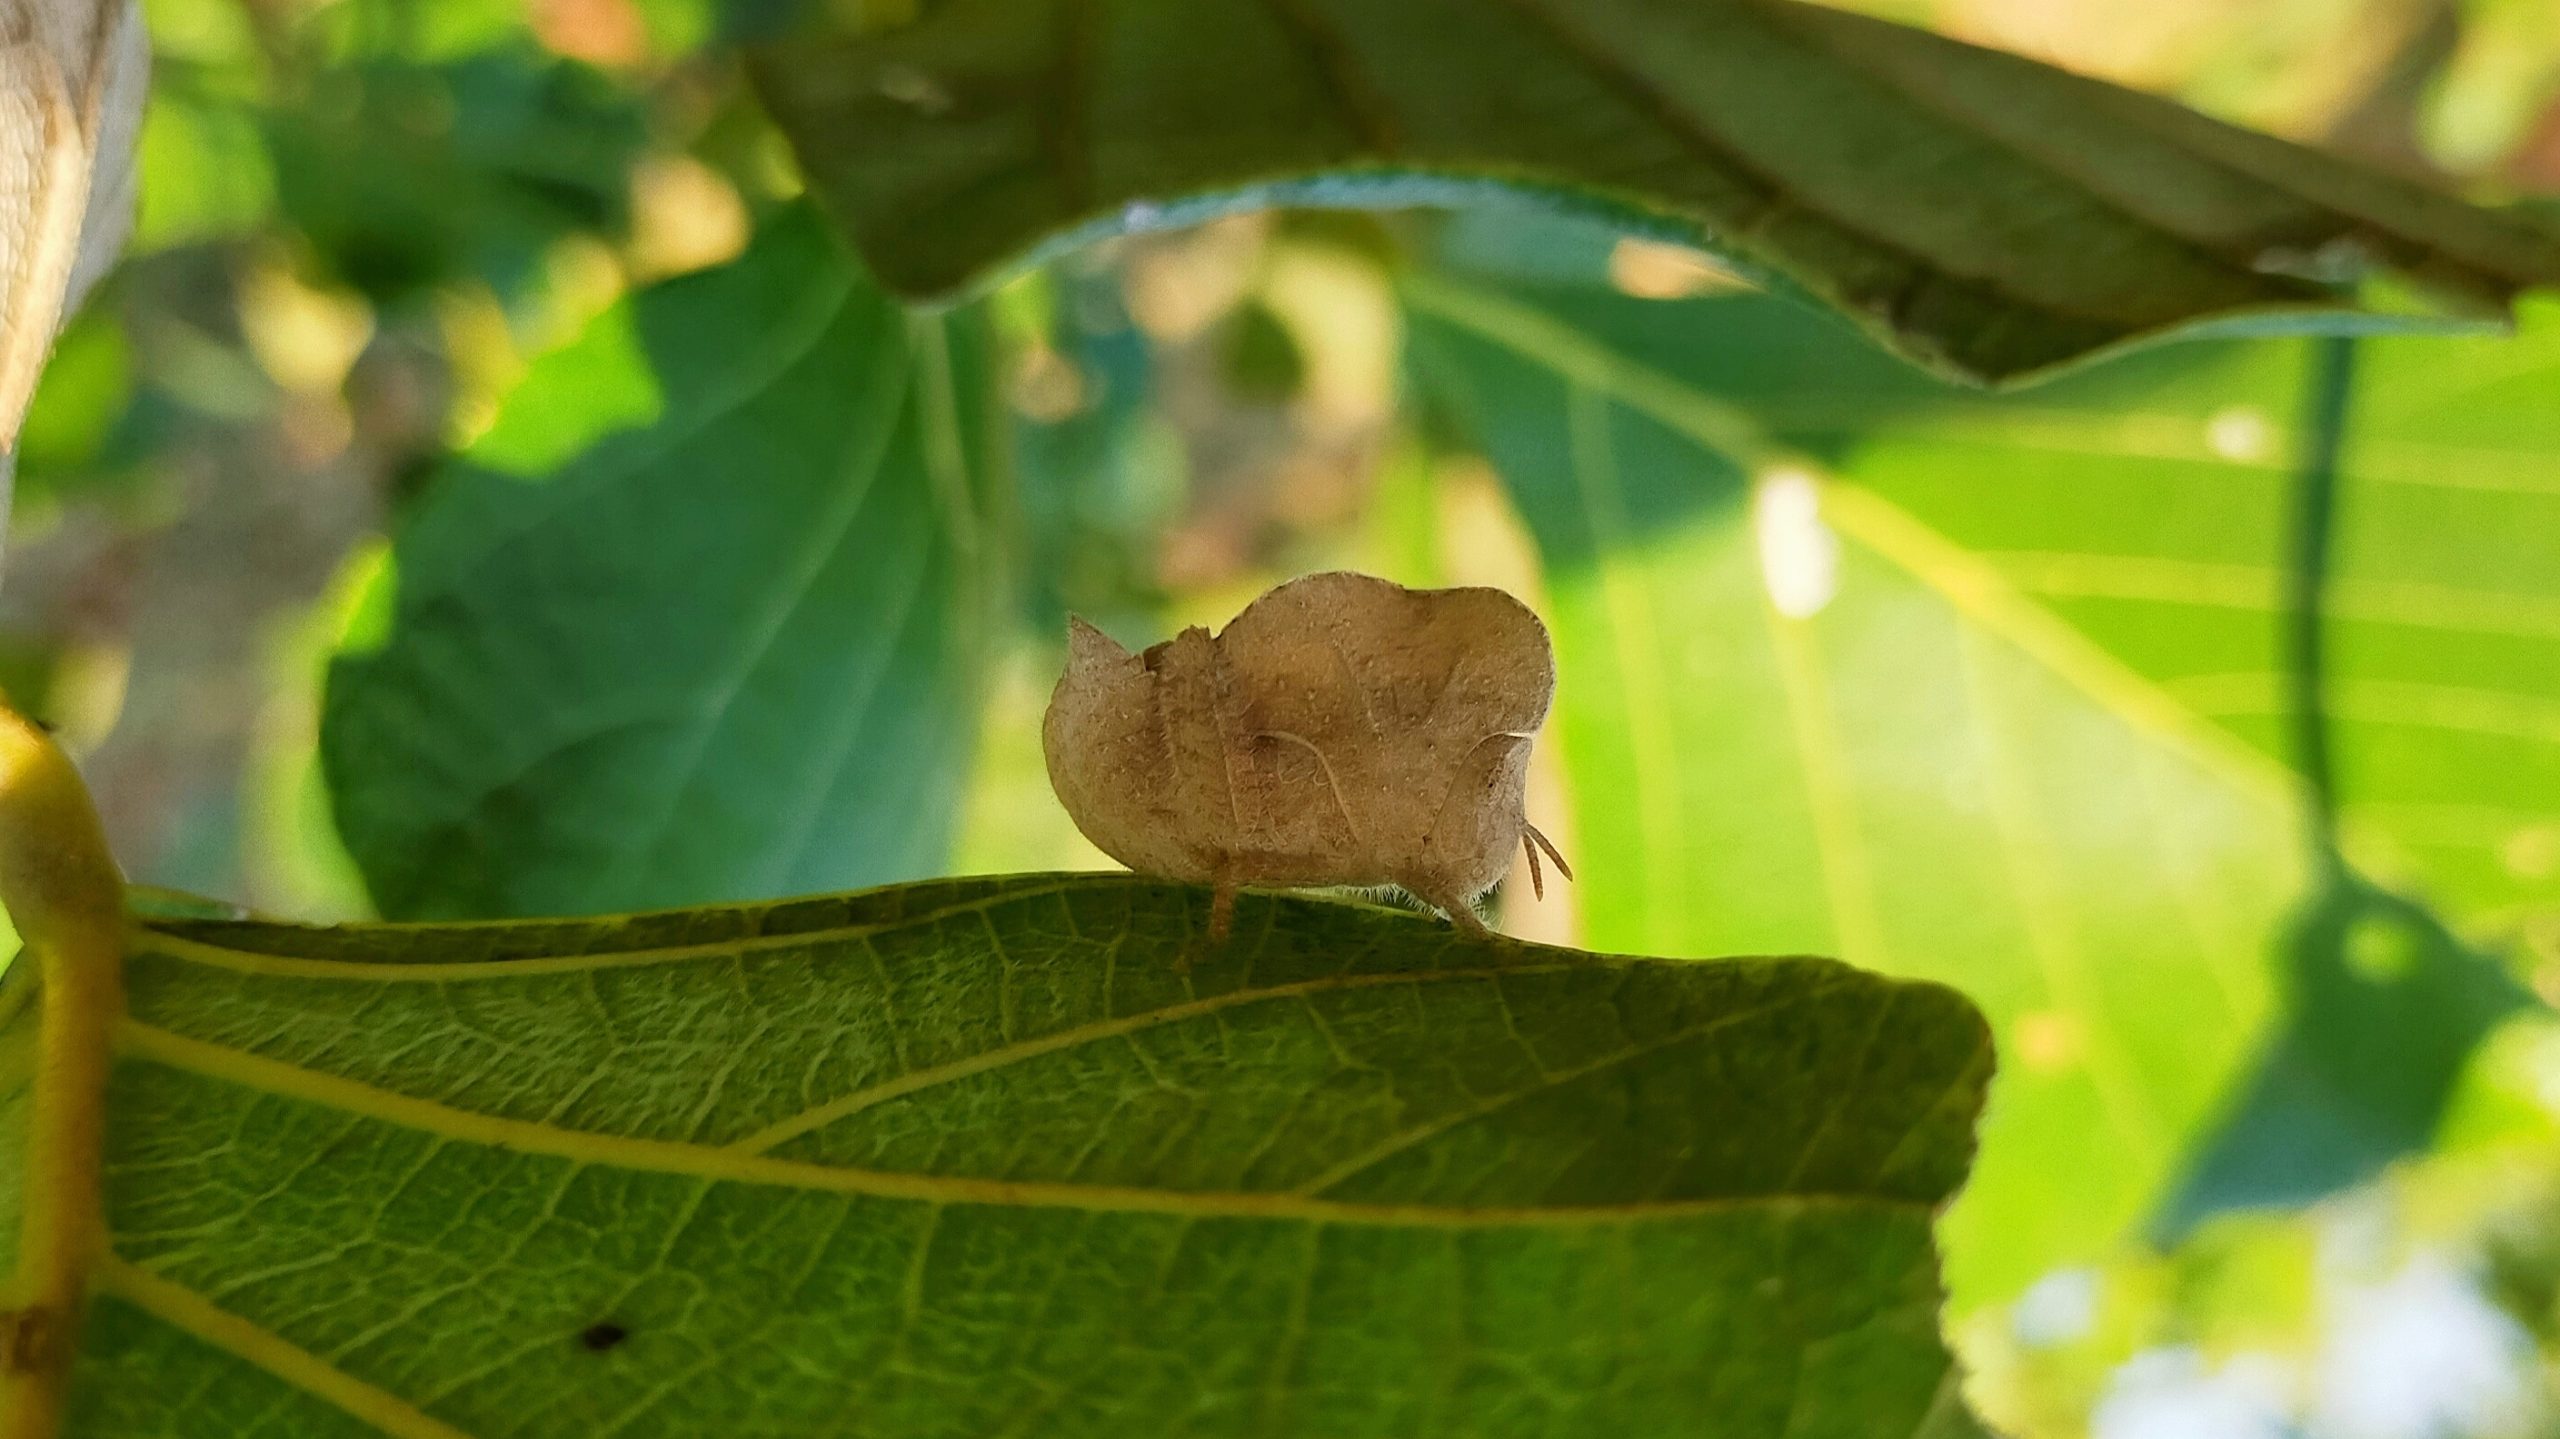 An insect on a leaf